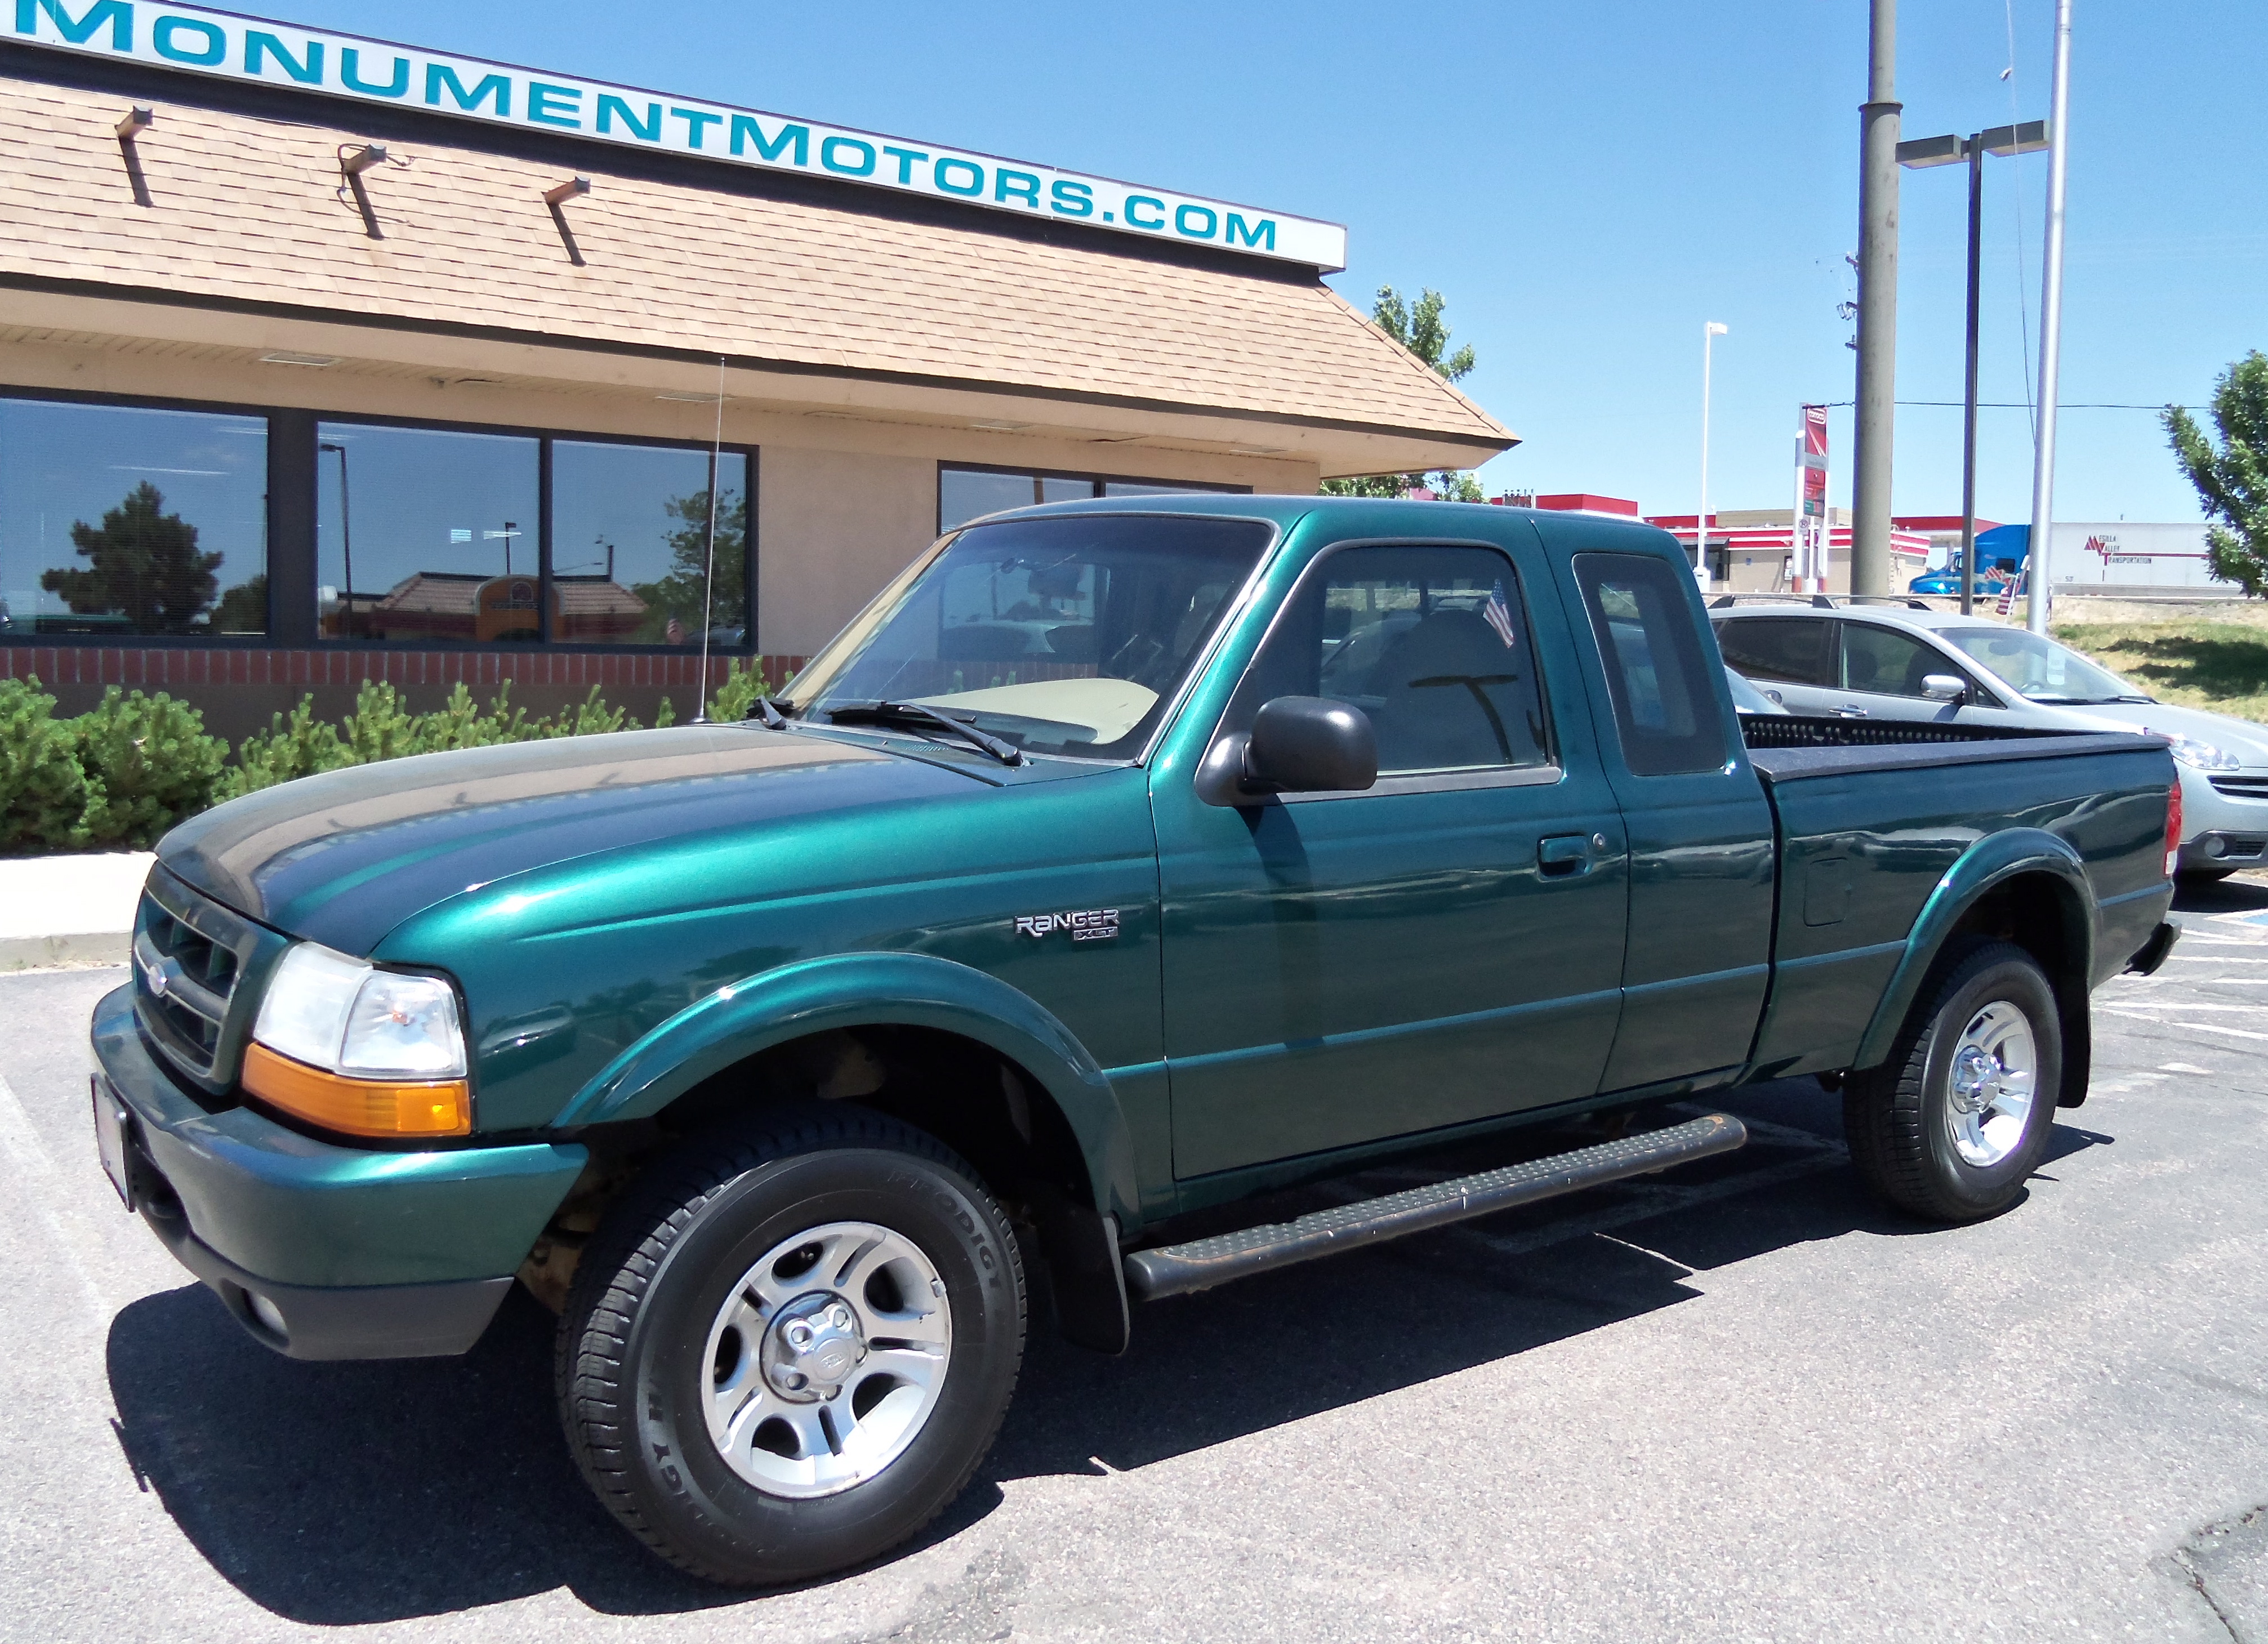 2000 Ford ranger tow package